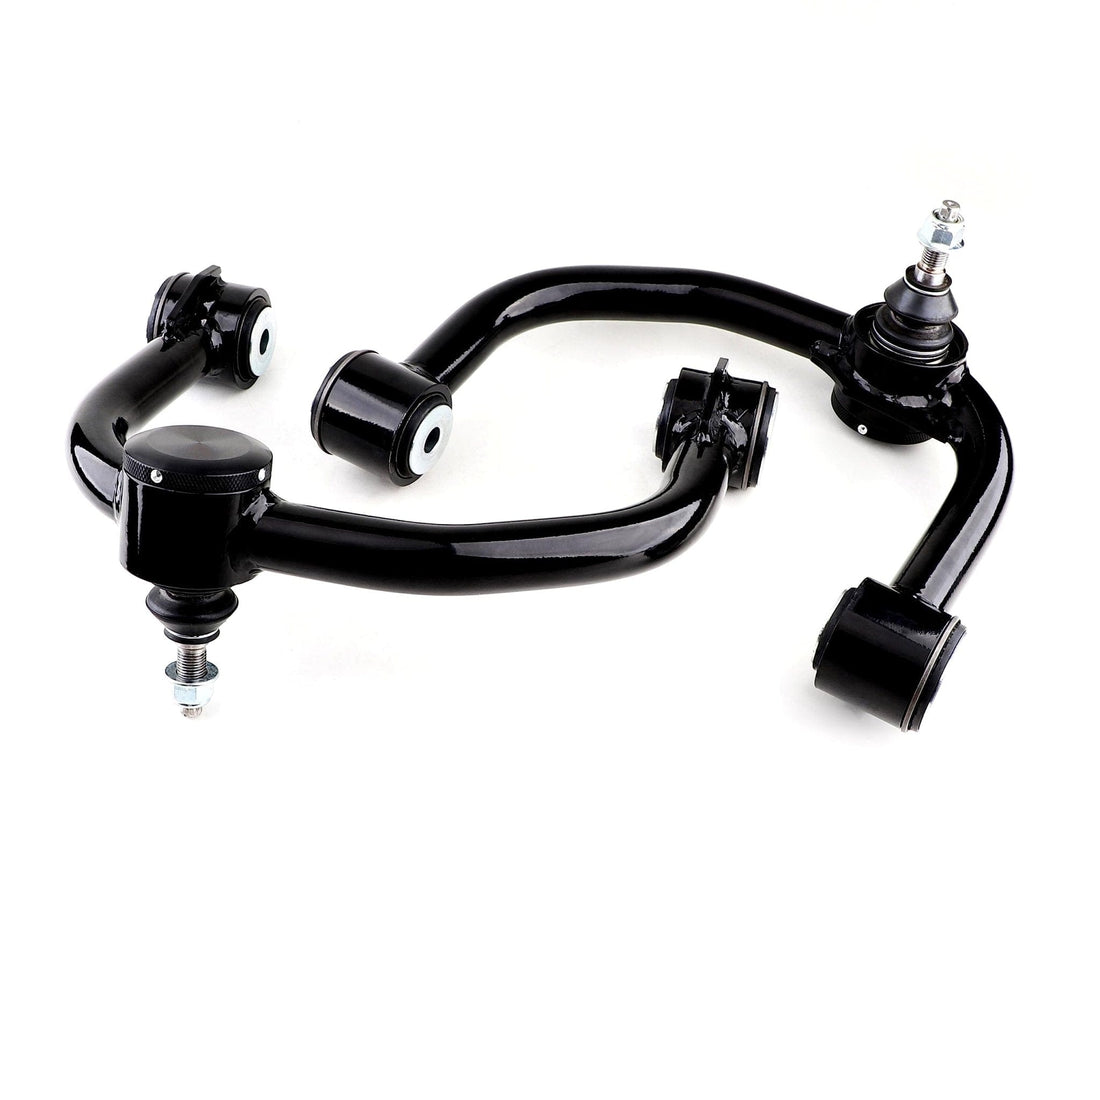 GARVEE 2x Upper Control Arms W/ Joints for 06-22 RAM 1500 4WD - GARVEE